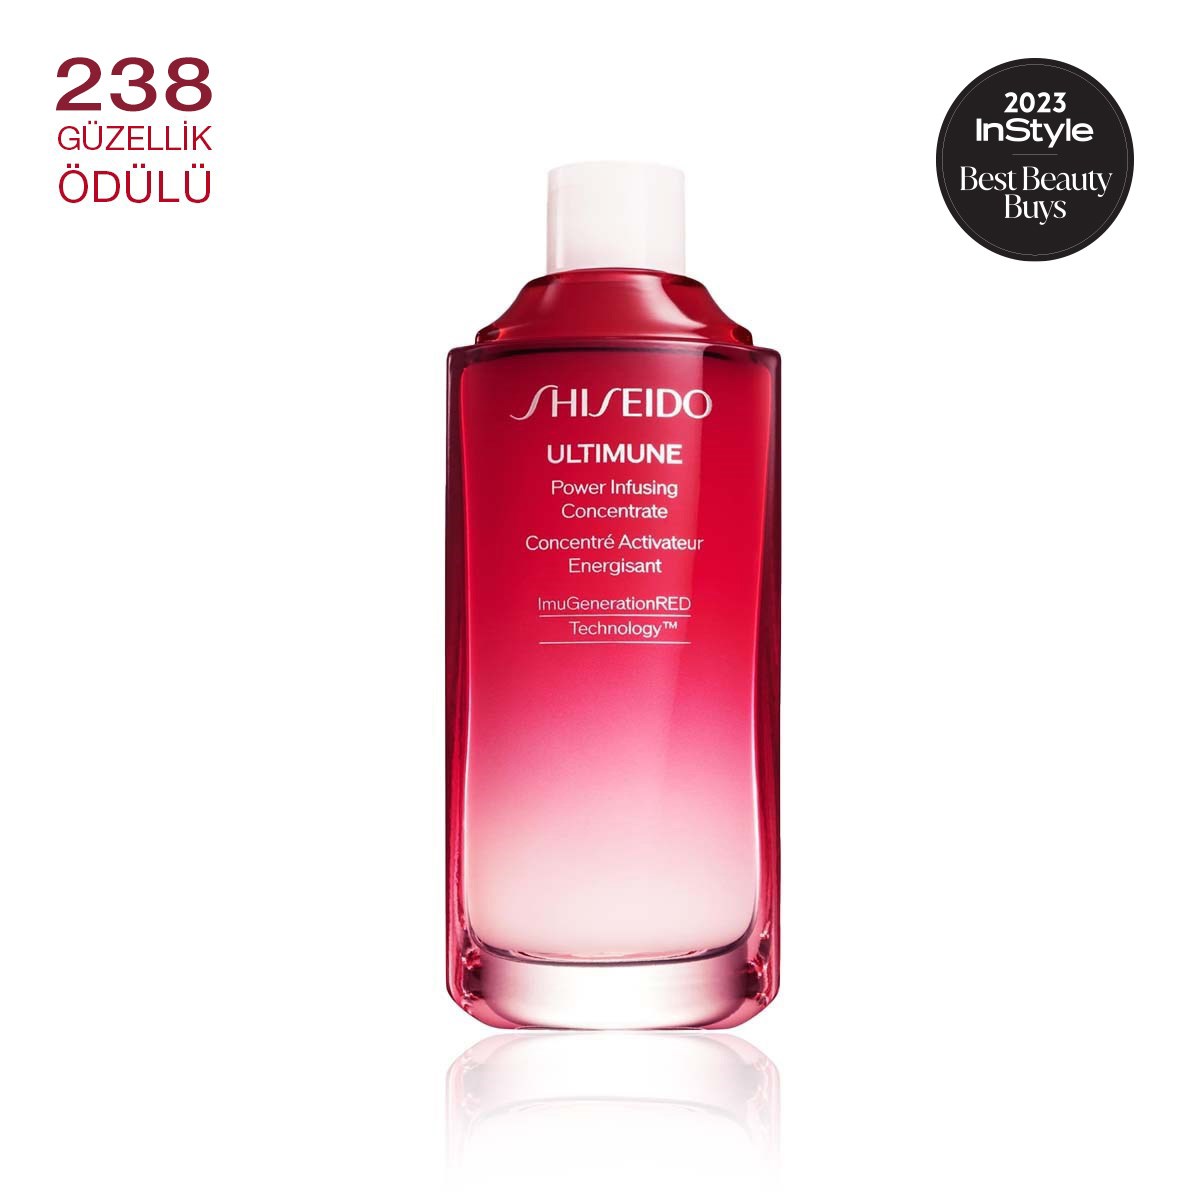 ULTIMUNE POWER INFUSING CONCENTRATE - 75ML - REFILL 1